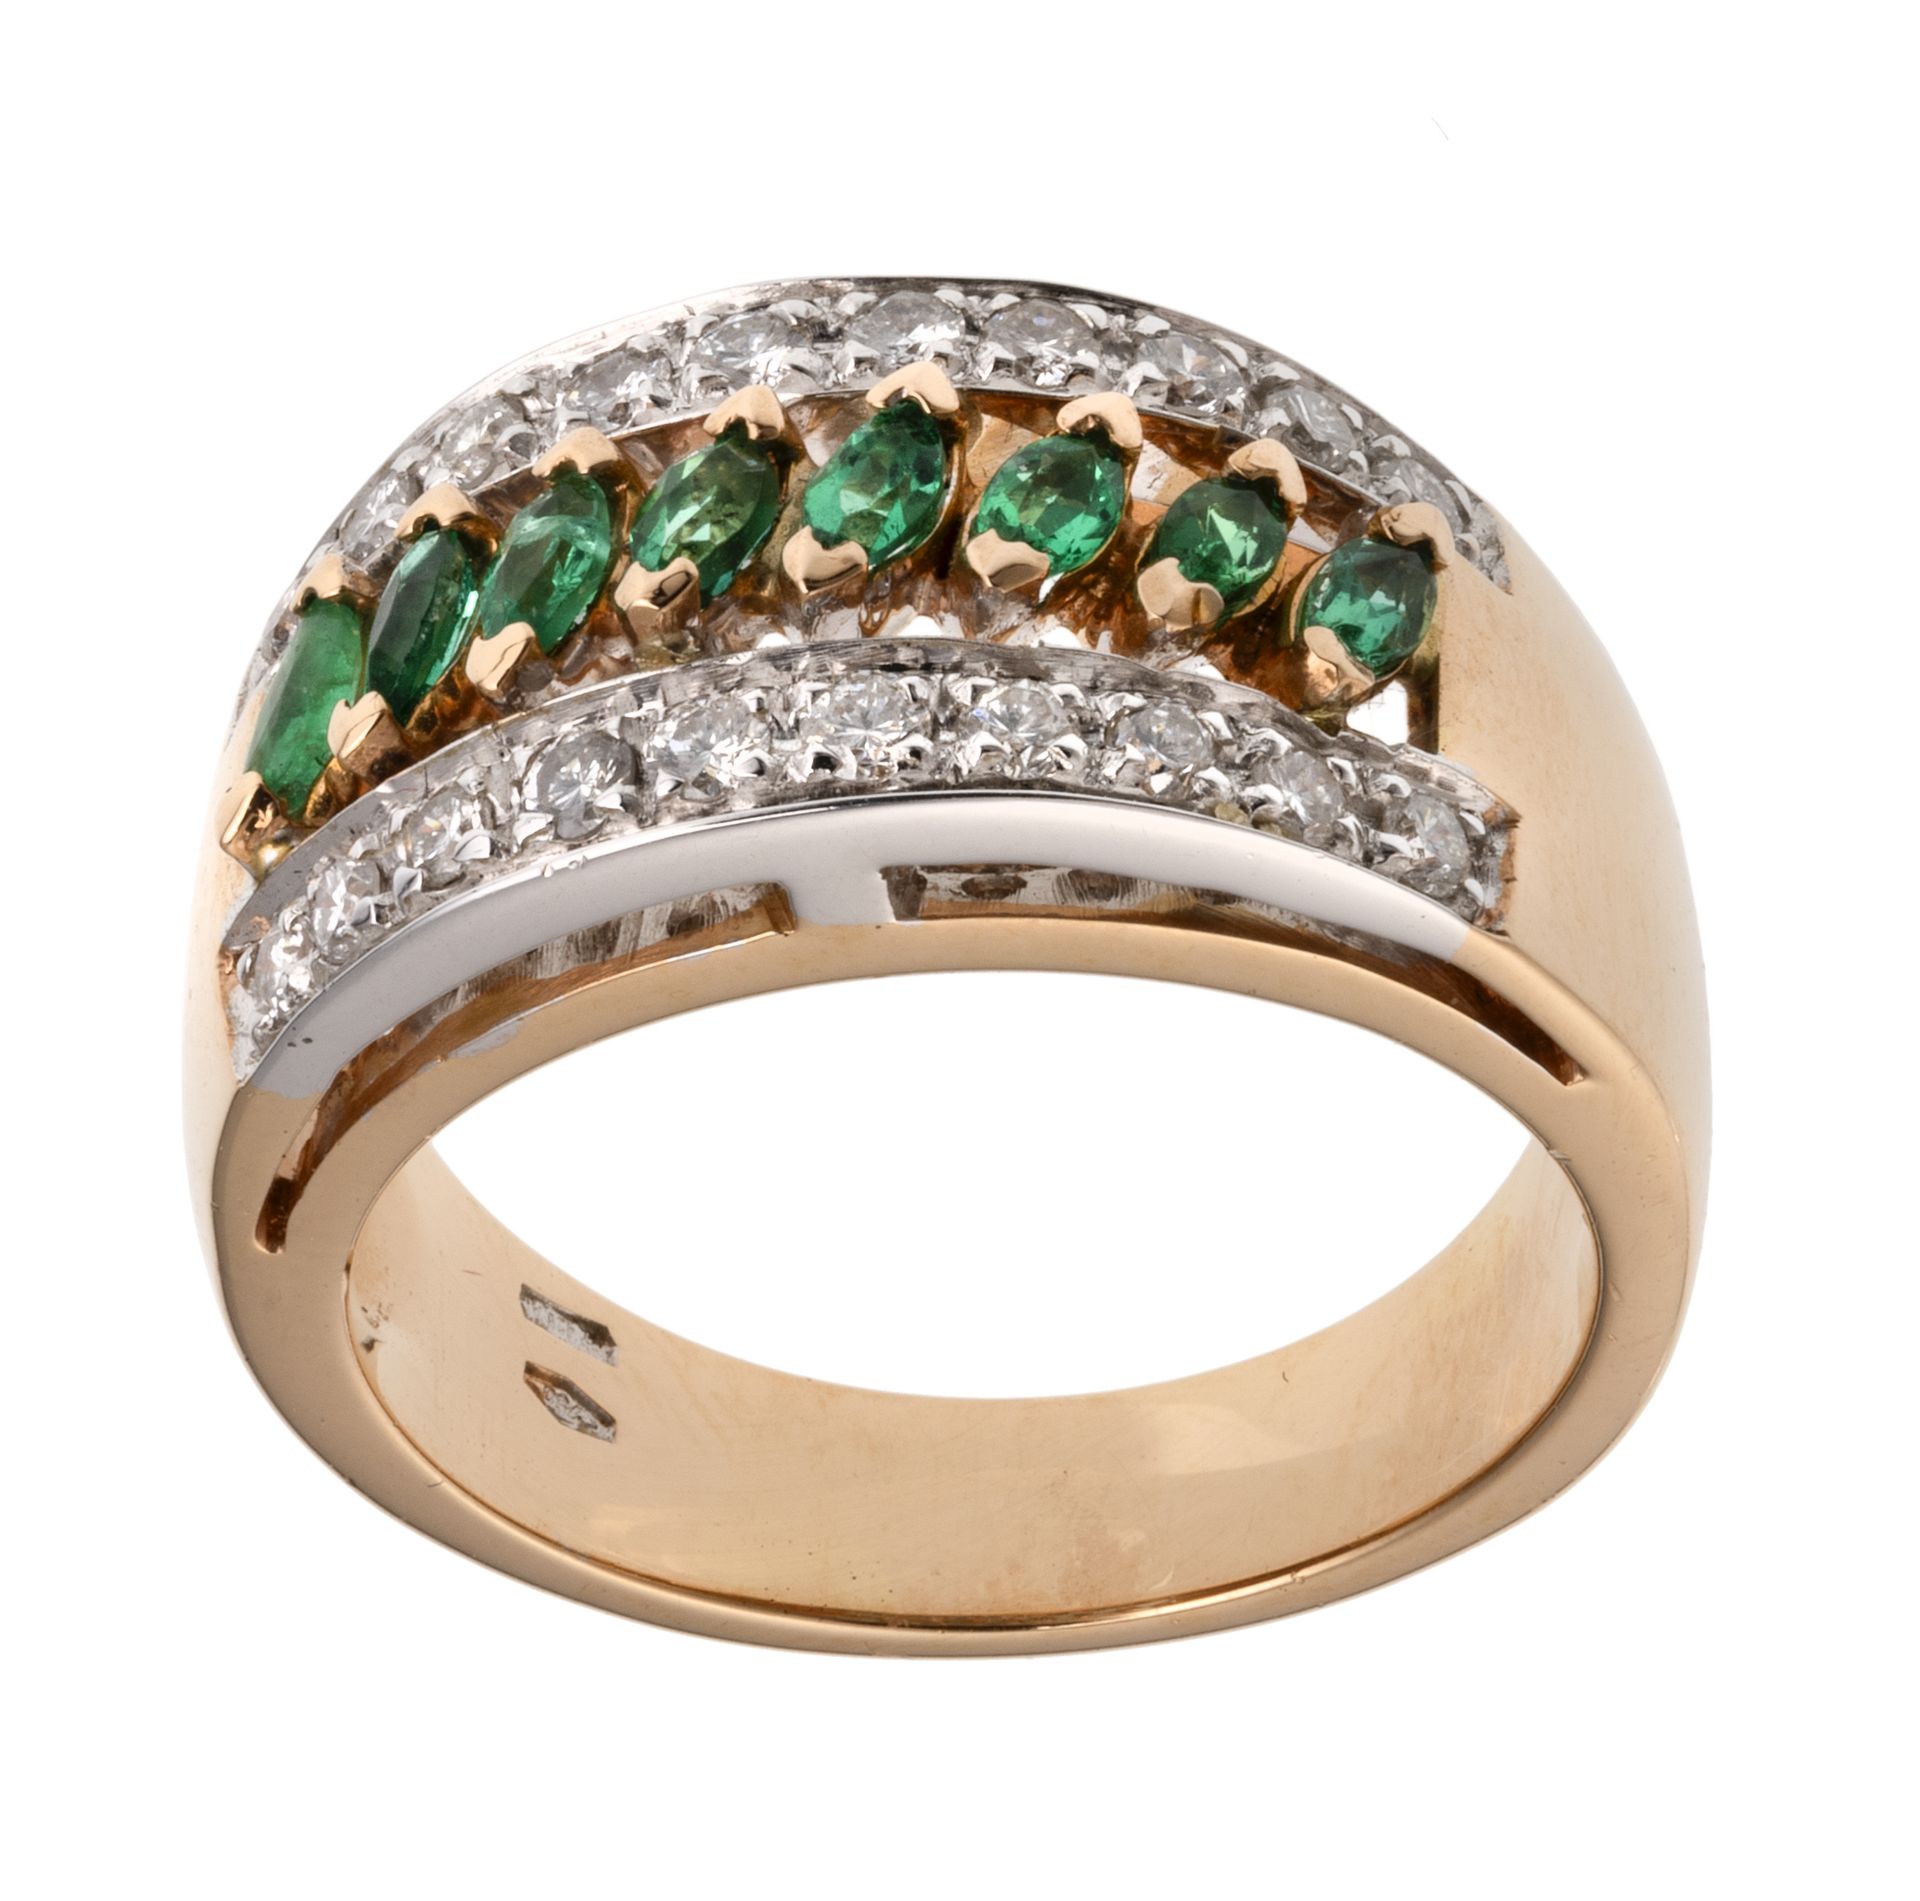 WHITE AND YELLOW GOLD RING WITH EMERALDS AND DIAMONDS